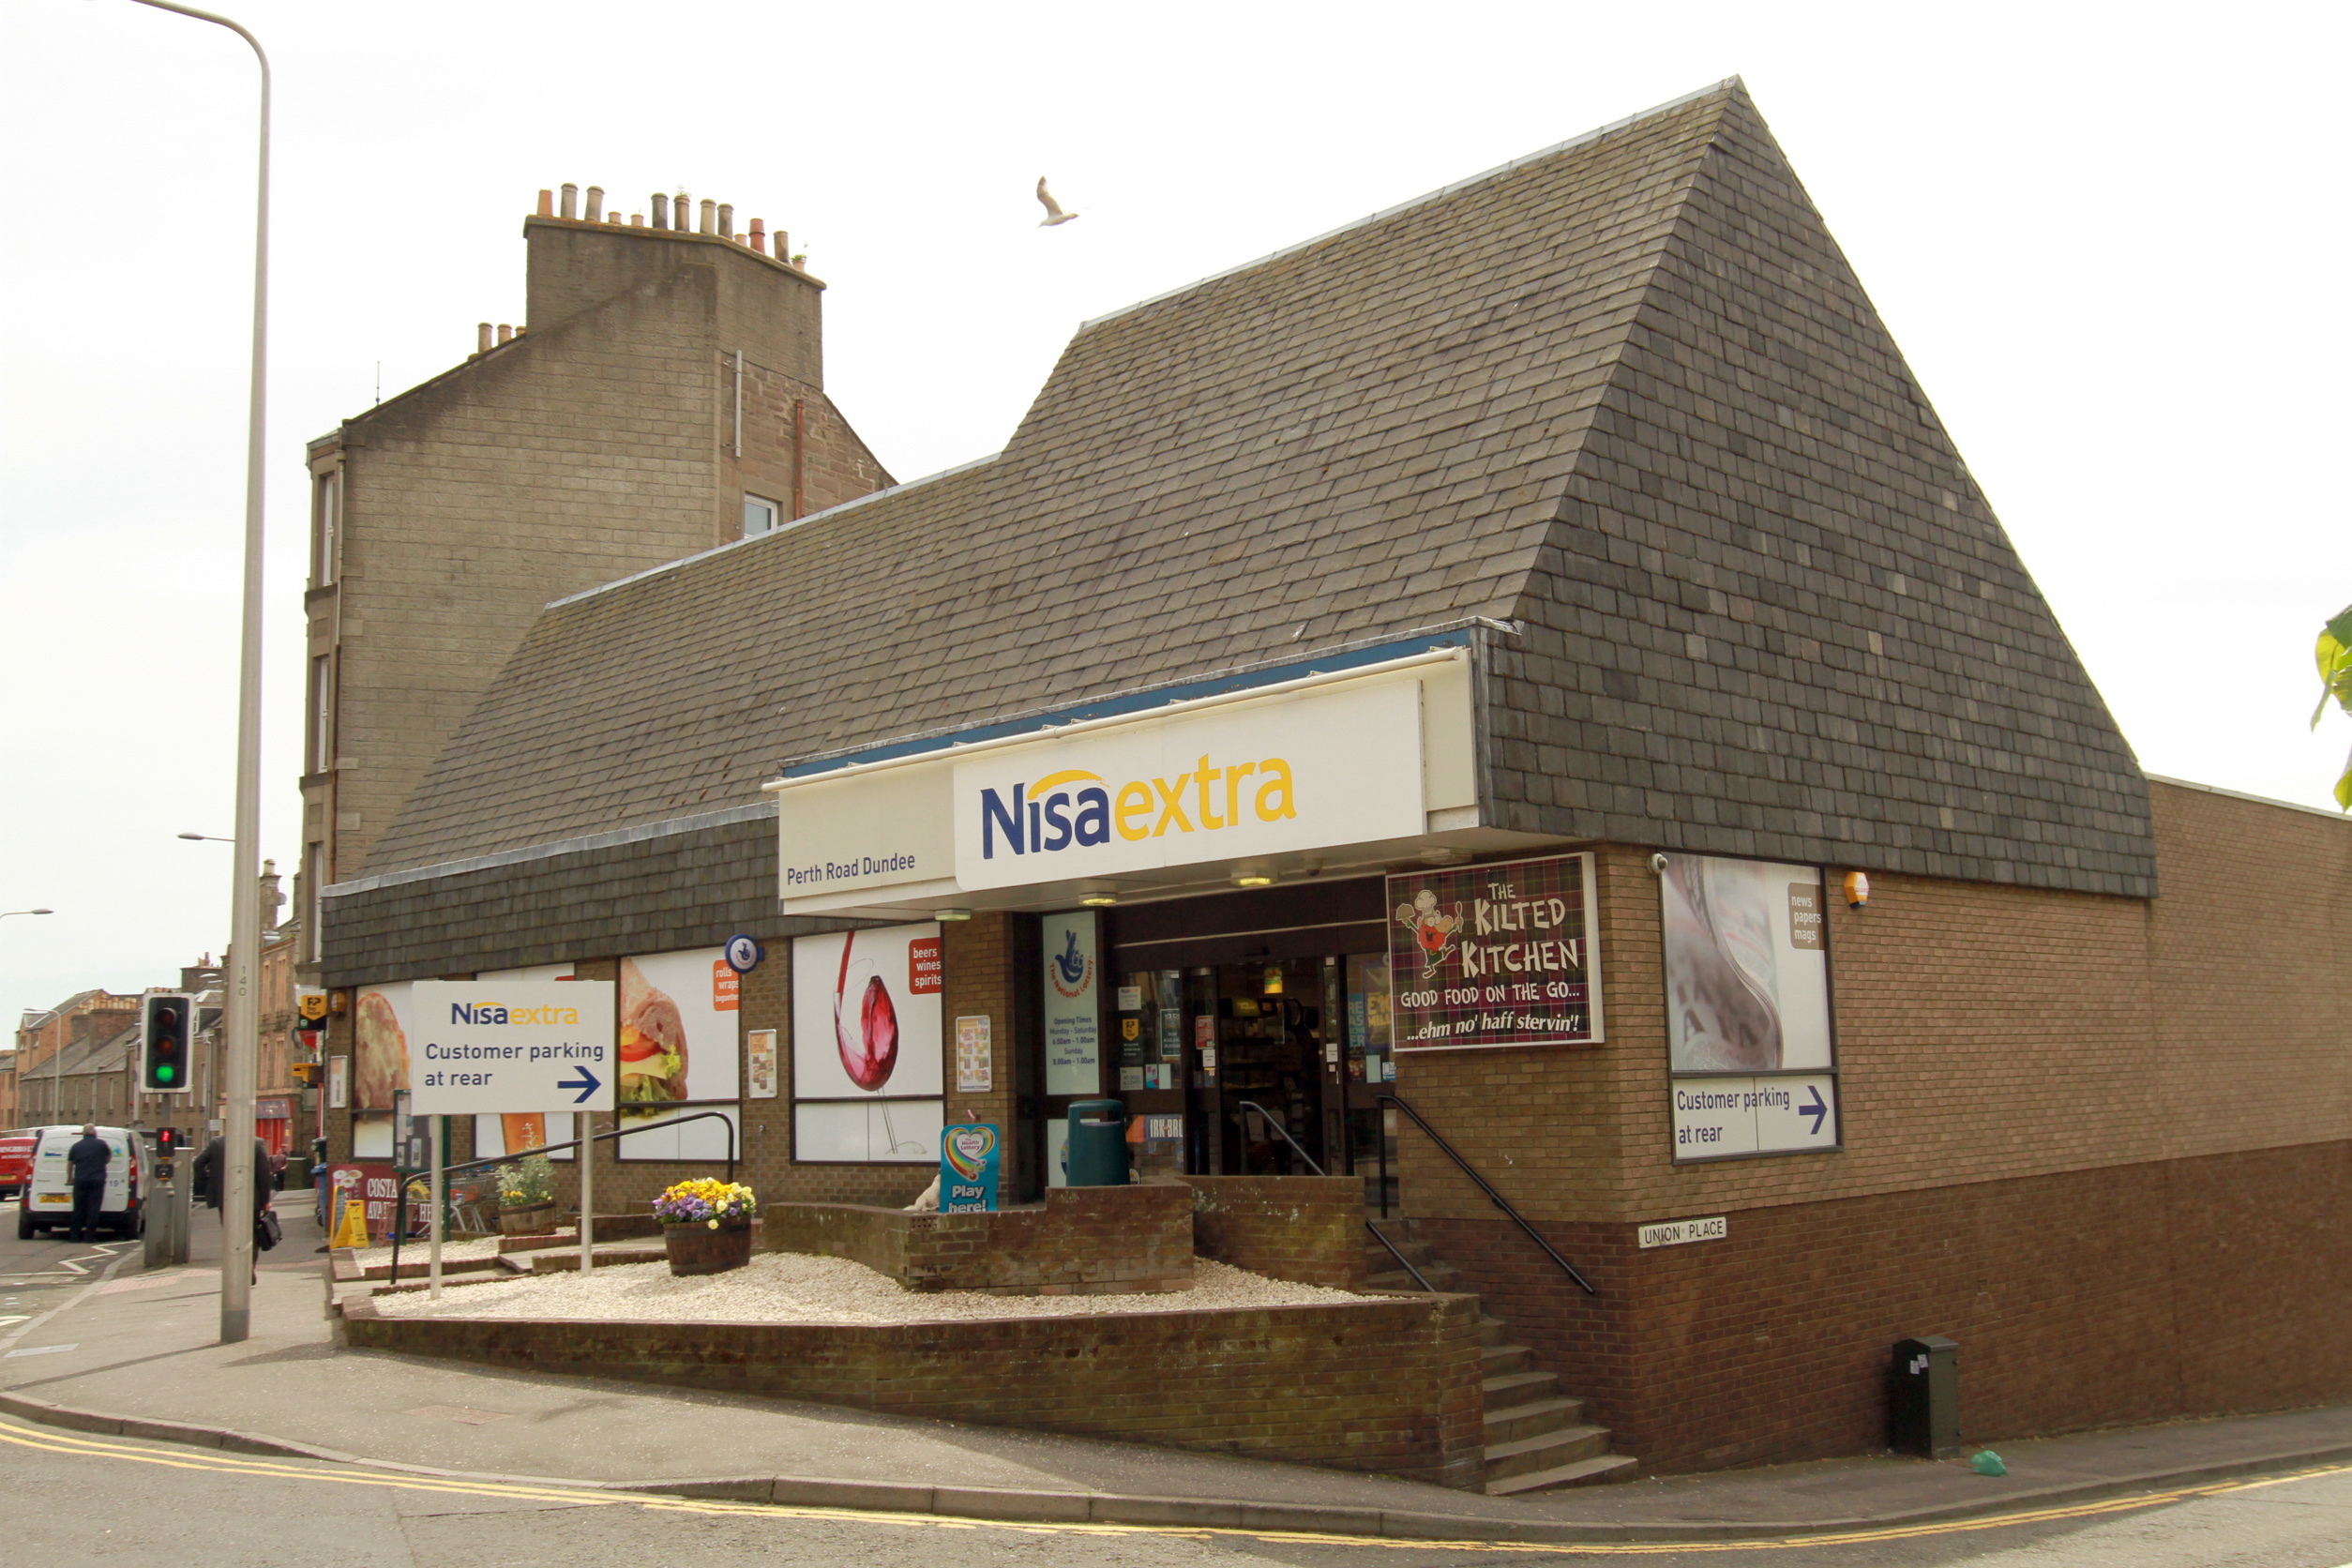 The Nisa store on Perth Road